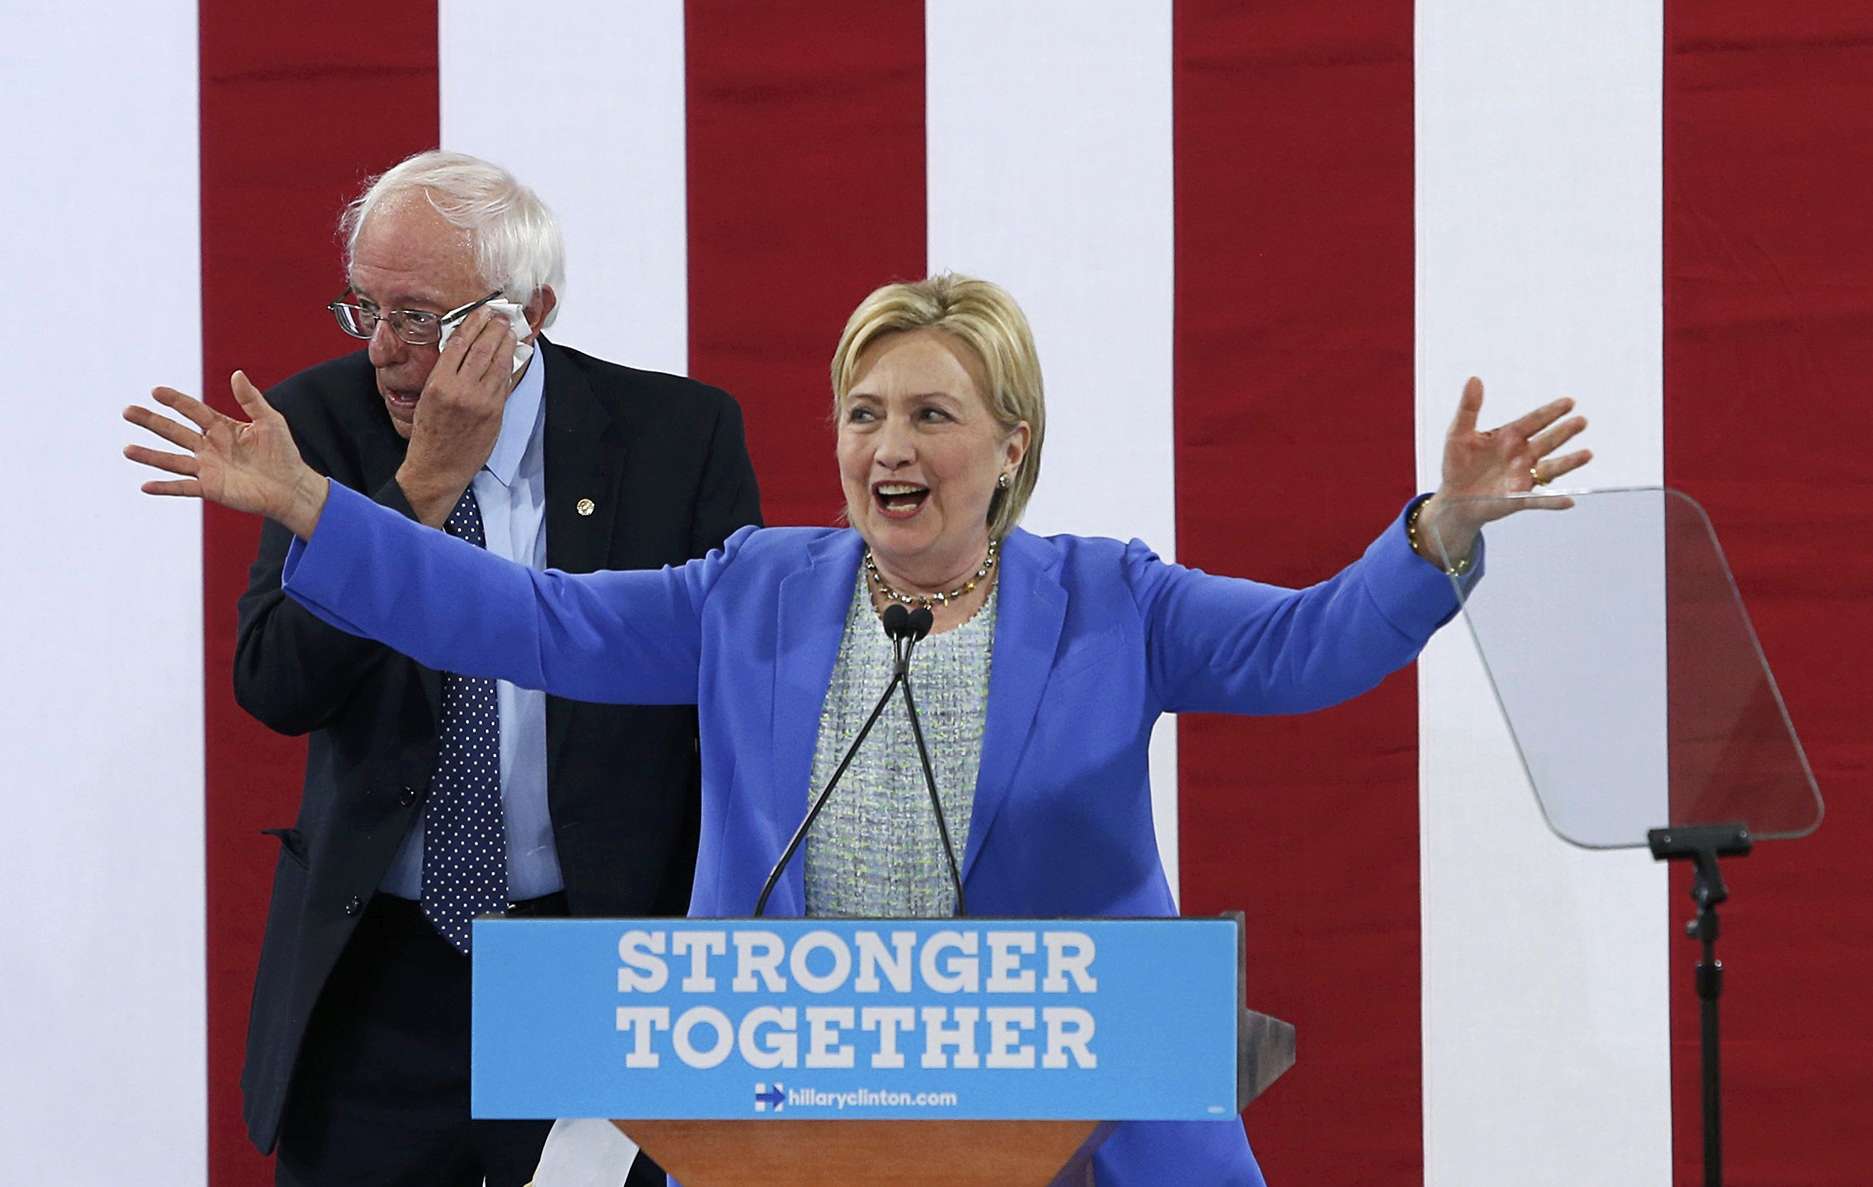 Hillary Clinton consolidated her leadership by suppressing the dissent of nomination rival Bernie Sanders’ centre-left opposition in the Democratic convention. Photo: Reuters